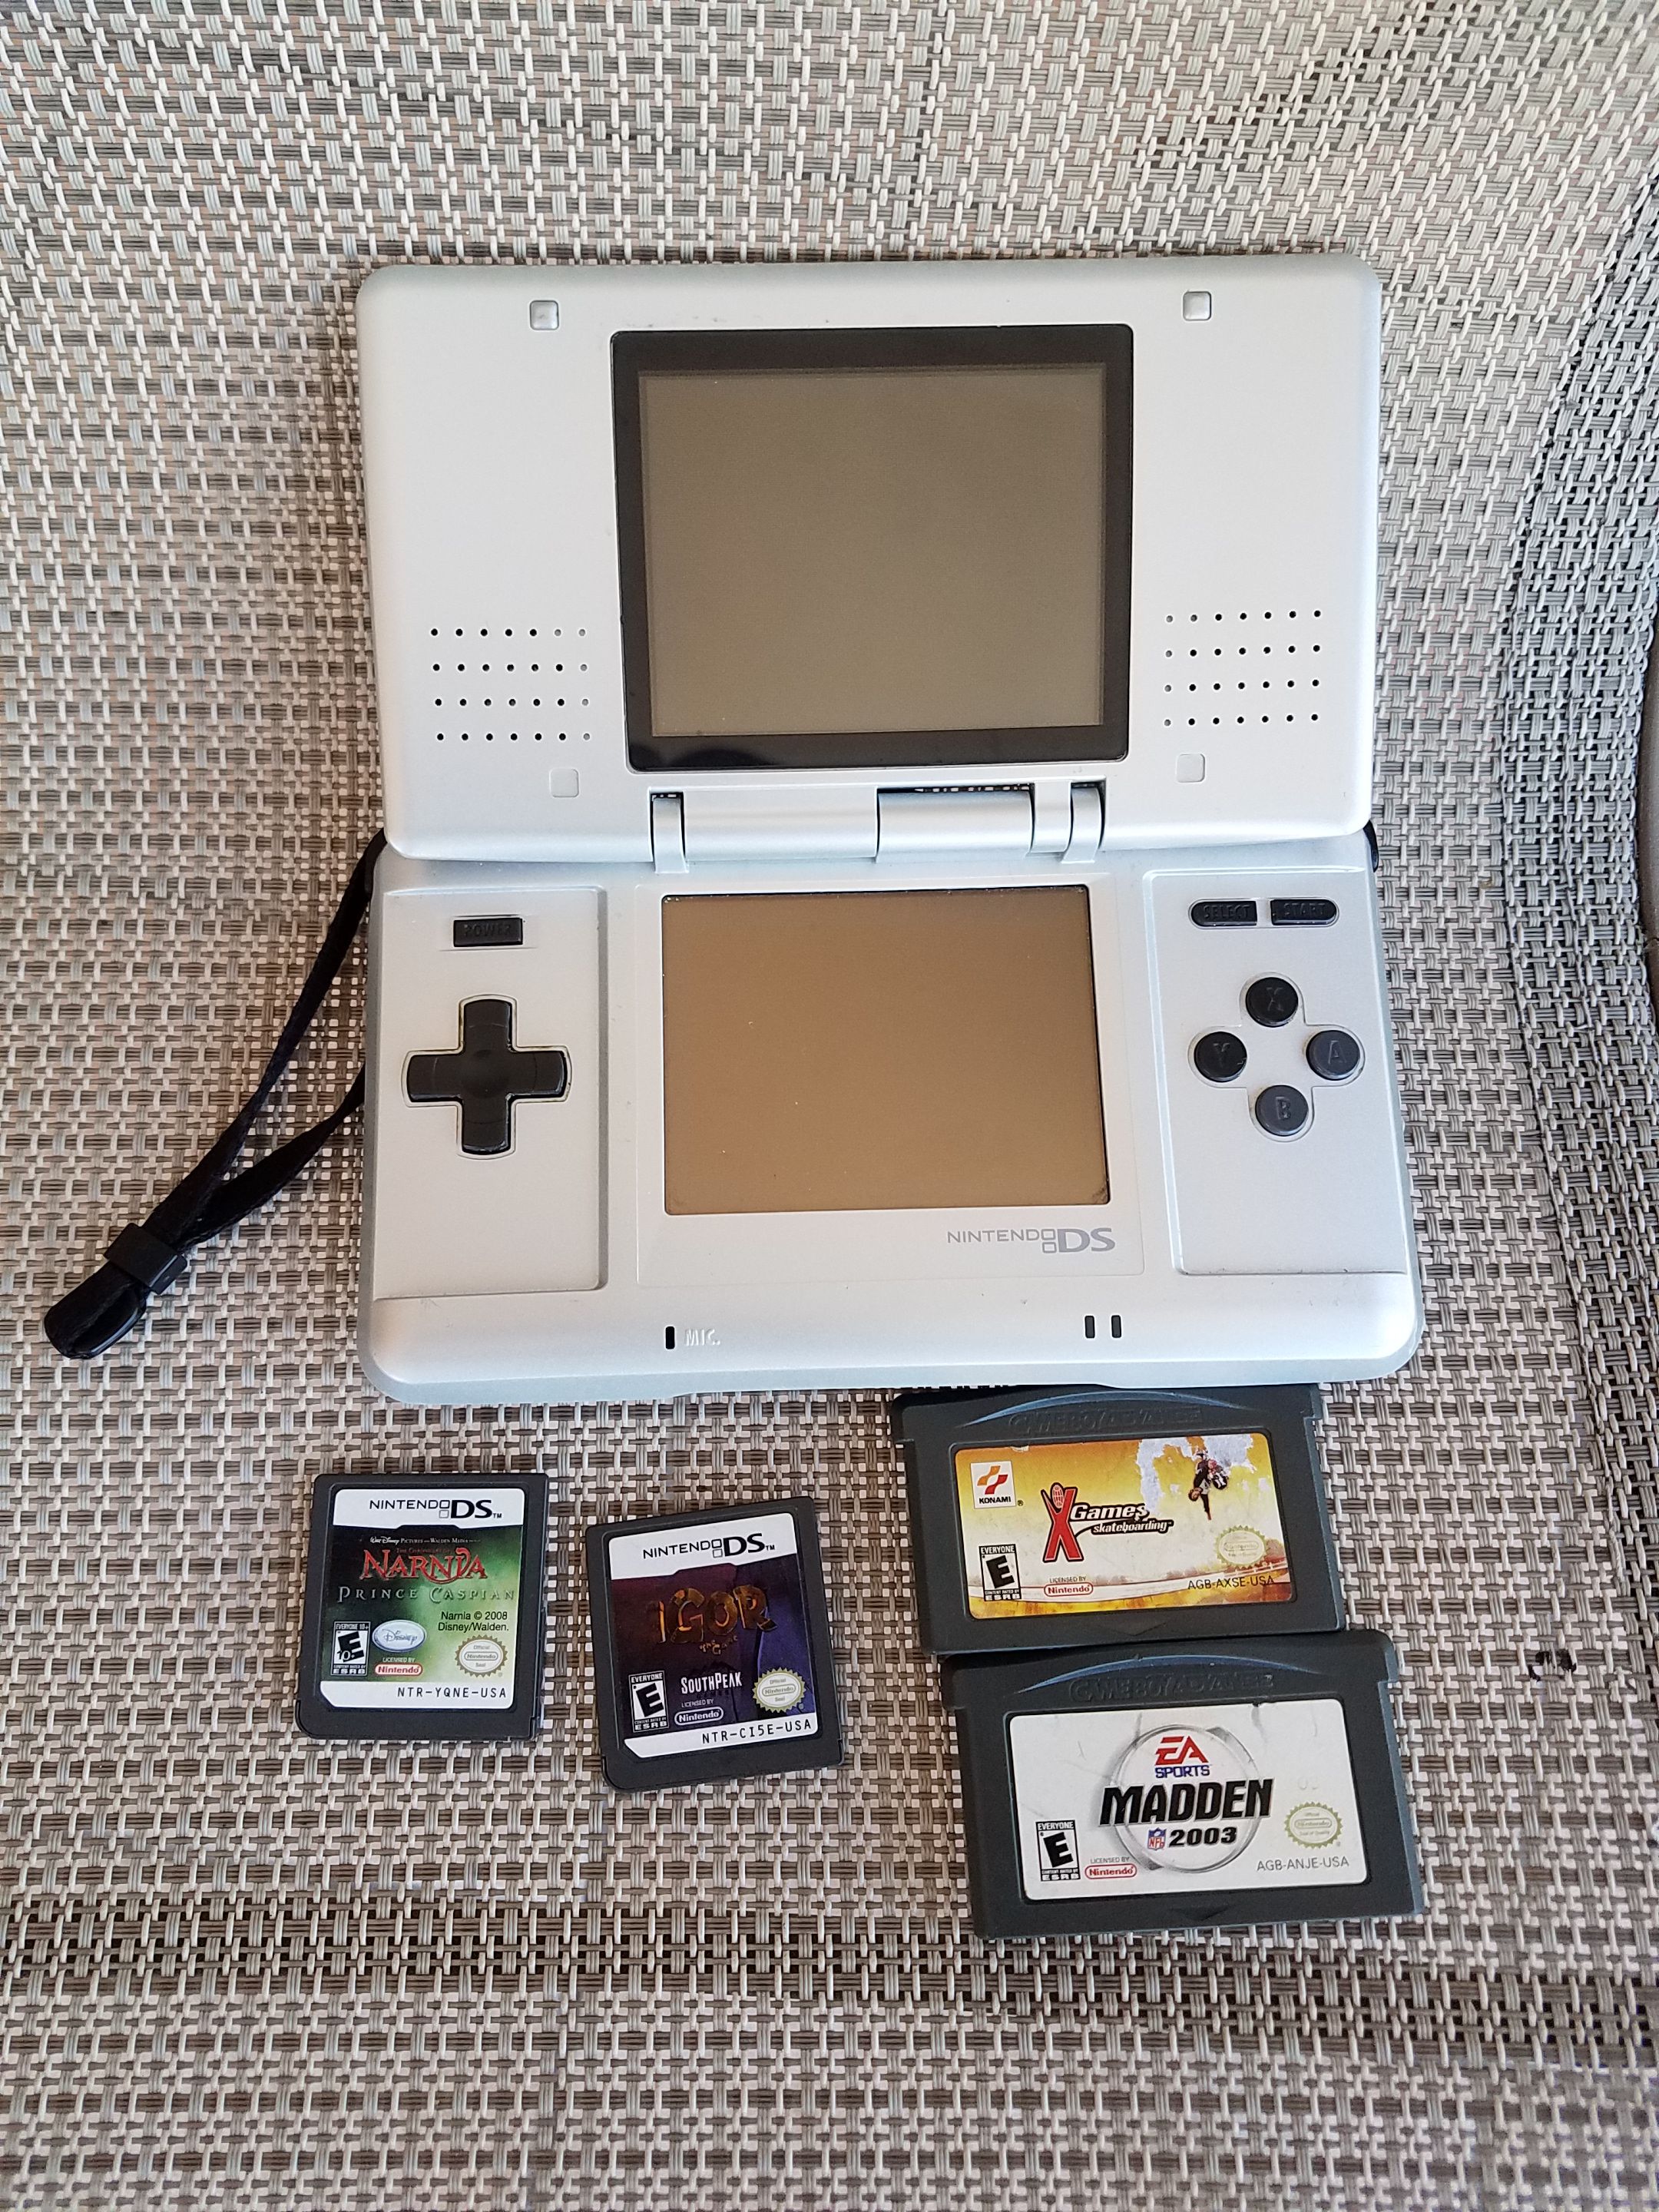 Mesterskab Muldyr puls Nintendo DS (Model # NTR-001) Bundle with 2 DS Games, 2 Gameboy Advance  Games, Stylus, and Original Nintendo Charger for Sale in Hialeah, FL -  OfferUp